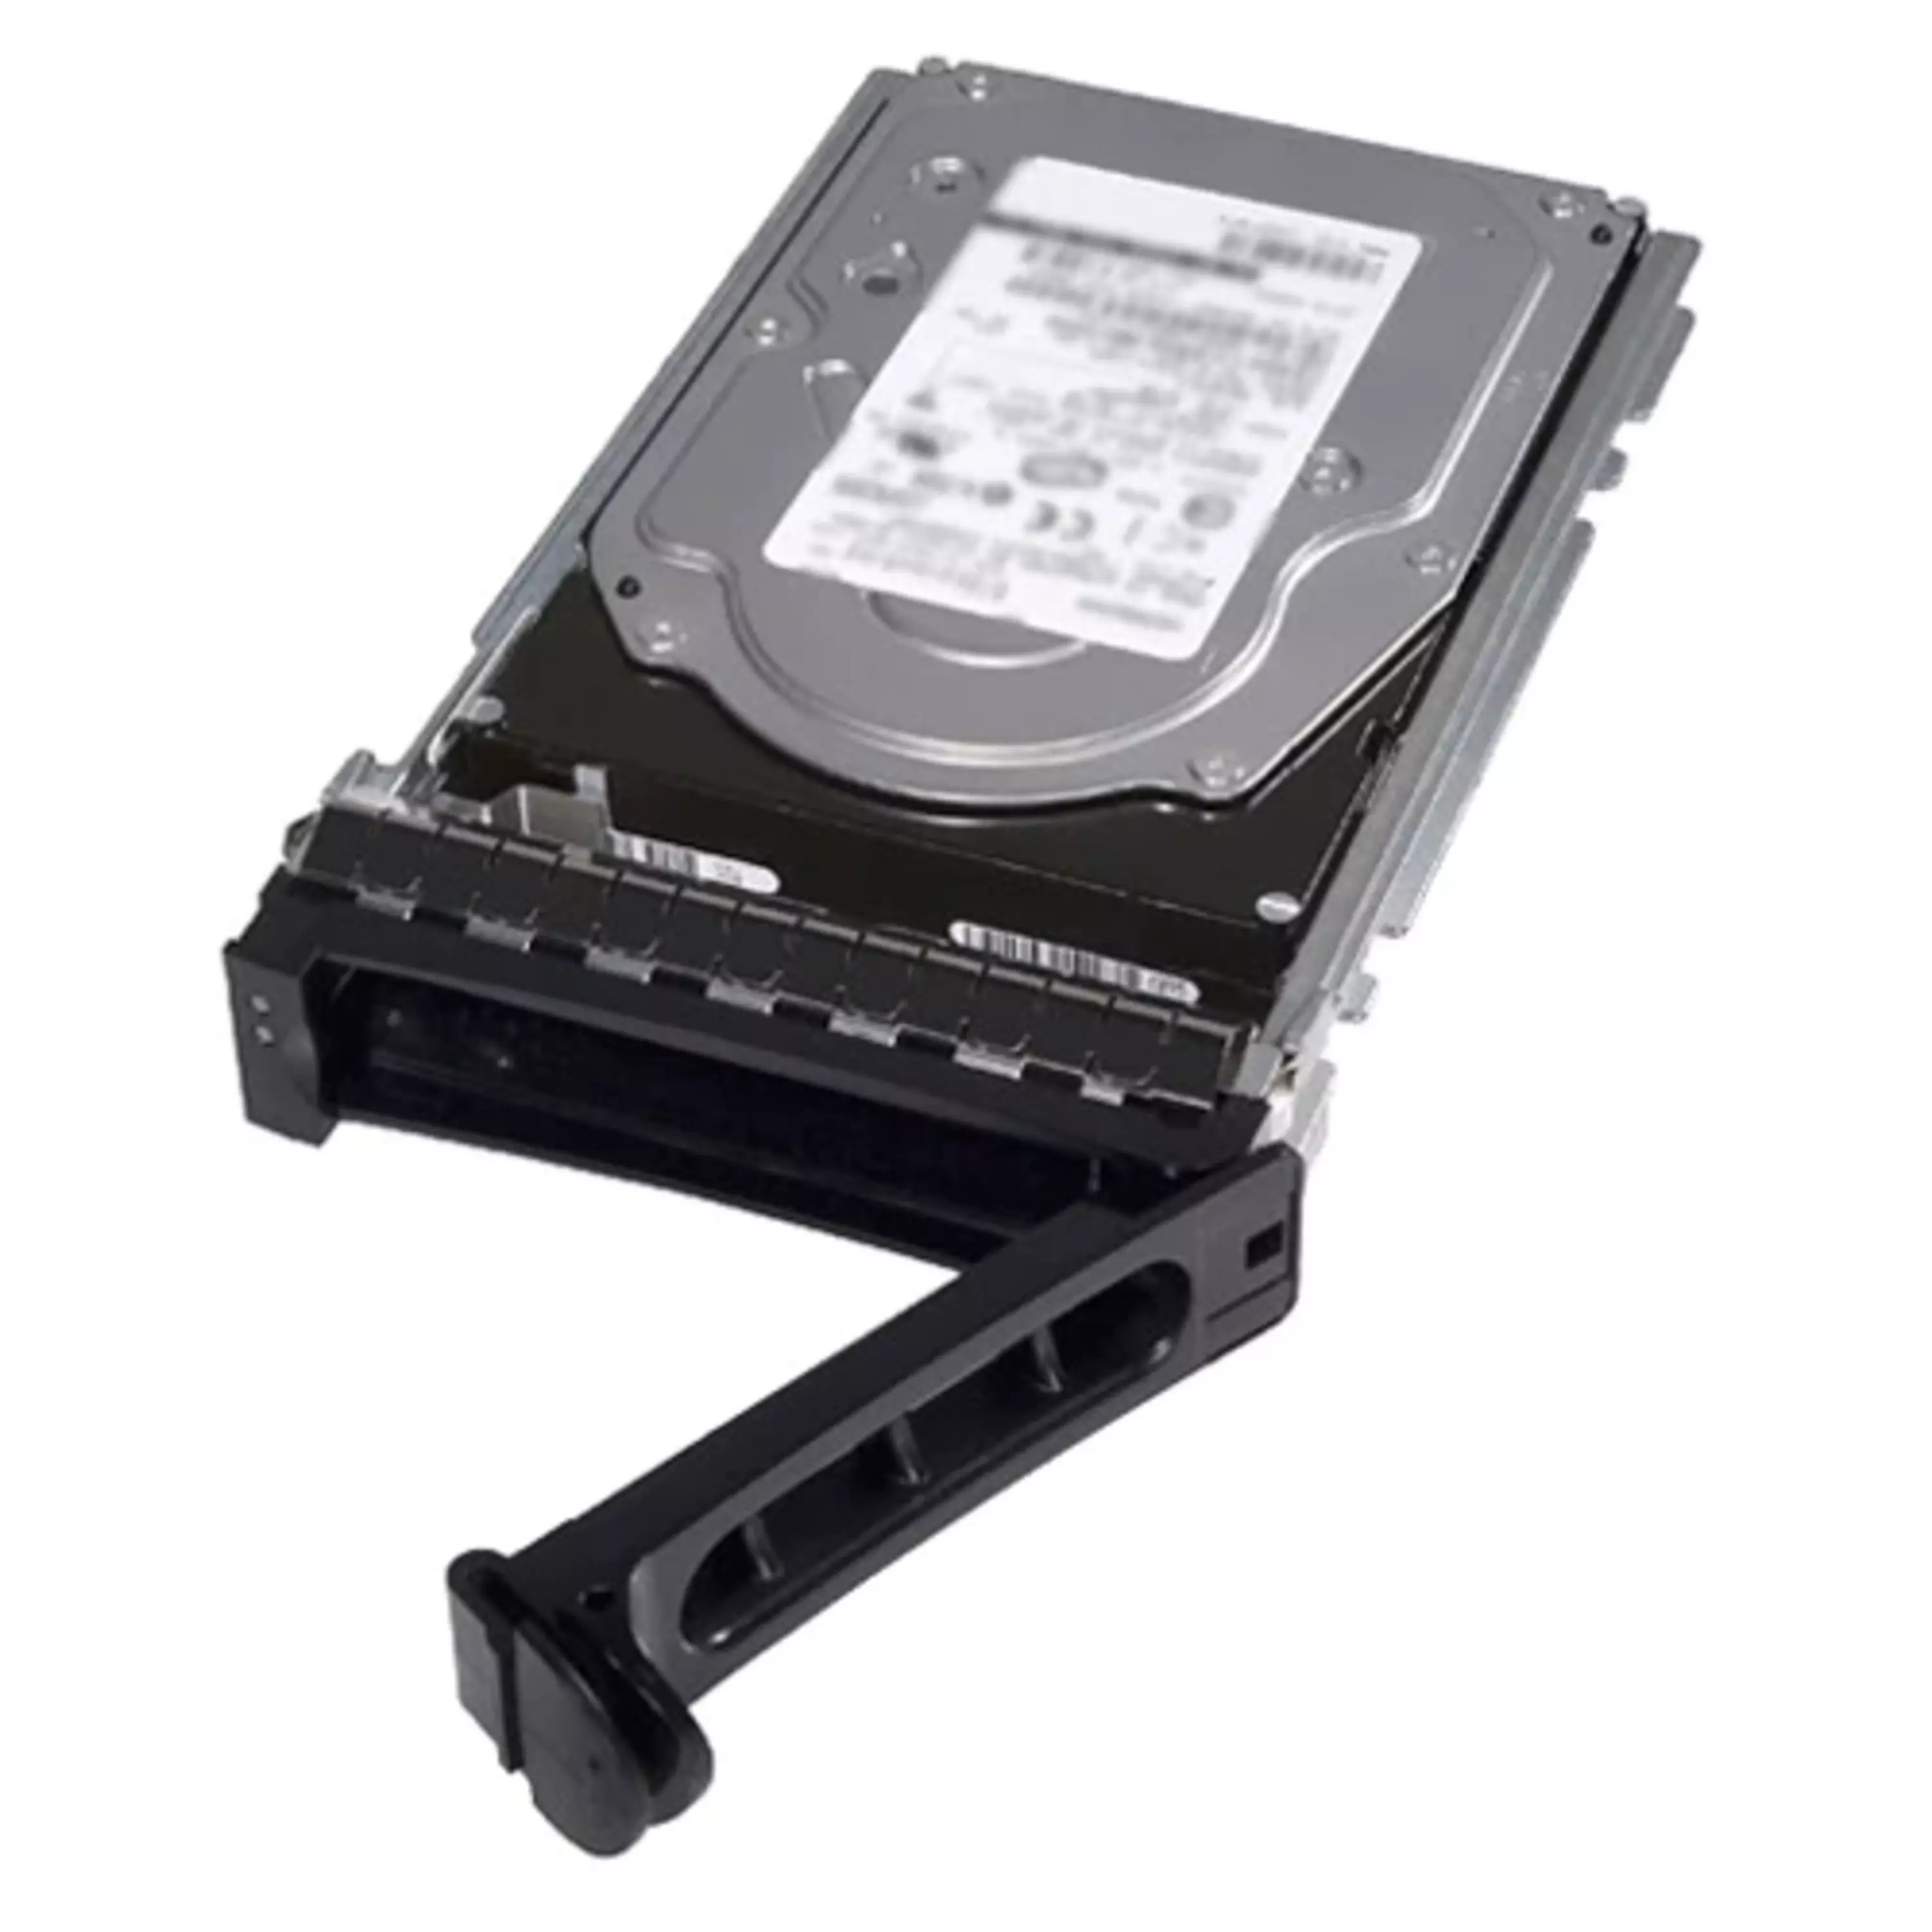 Mastery spiralformet Mekaniker Dell 800GB SSD SAS 12Gbps 512e 2.5in Hot-plug Drive AG | Dell USA